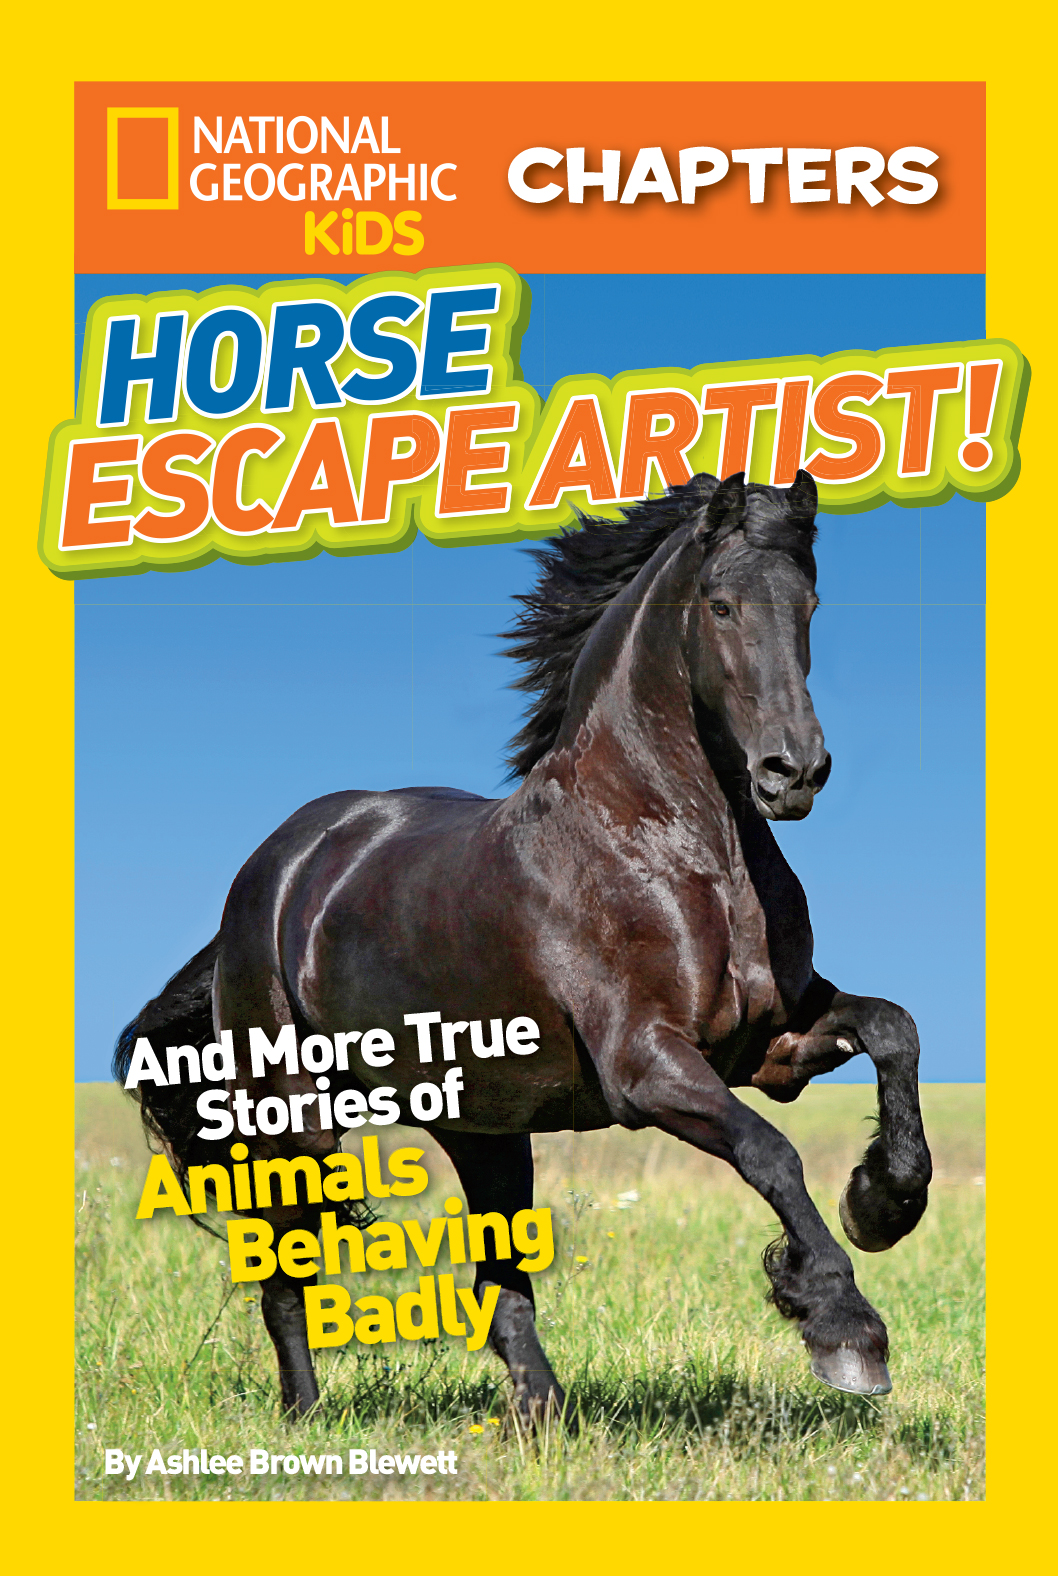 Horse escape artist and more true stories of animals behaving badly cover image